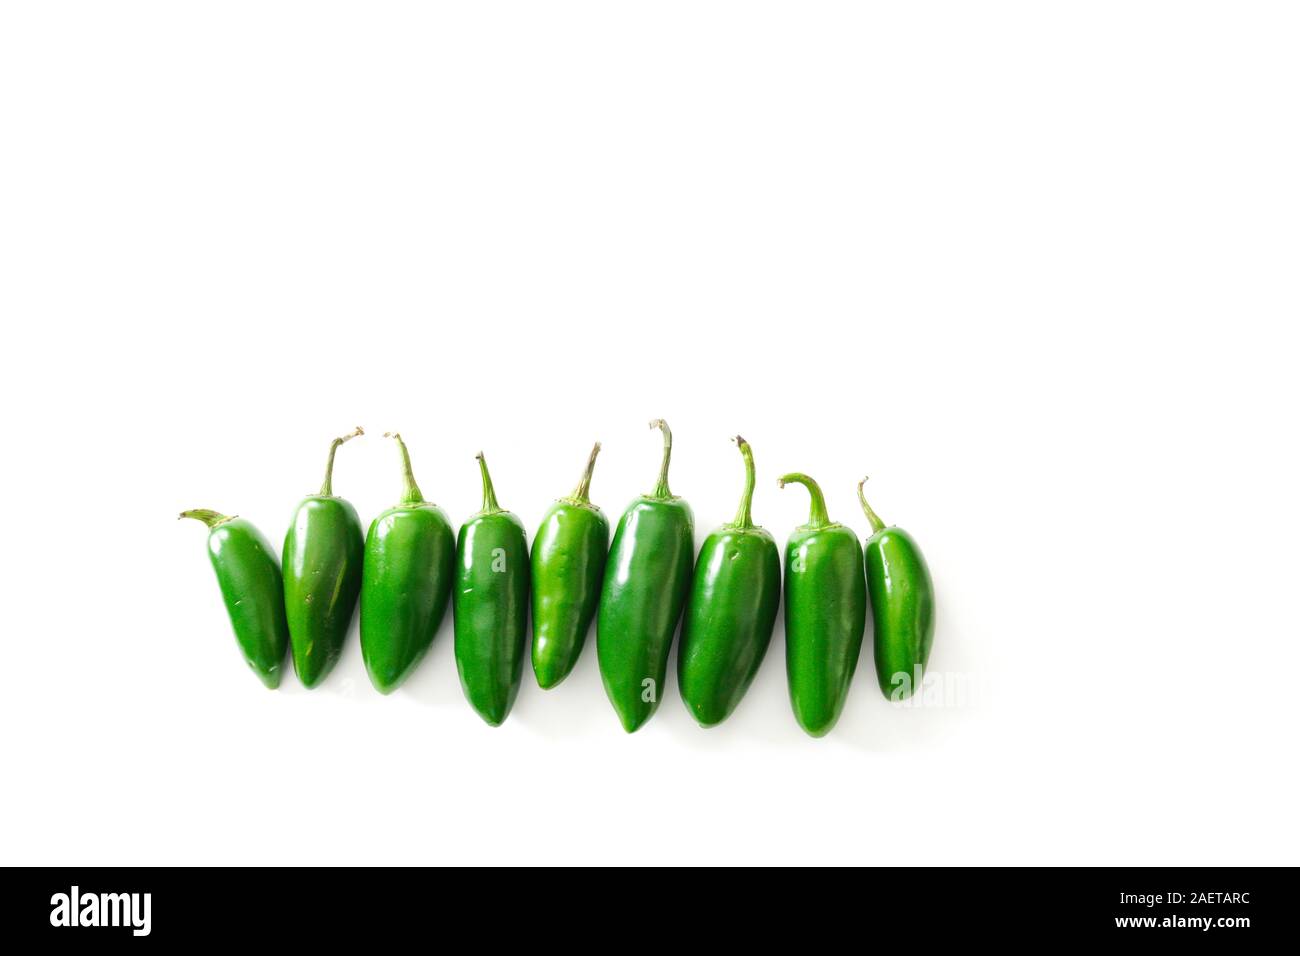 A row of bright green jalapeno peppers isolated on a white background with copy space; food preparation Stock Photo